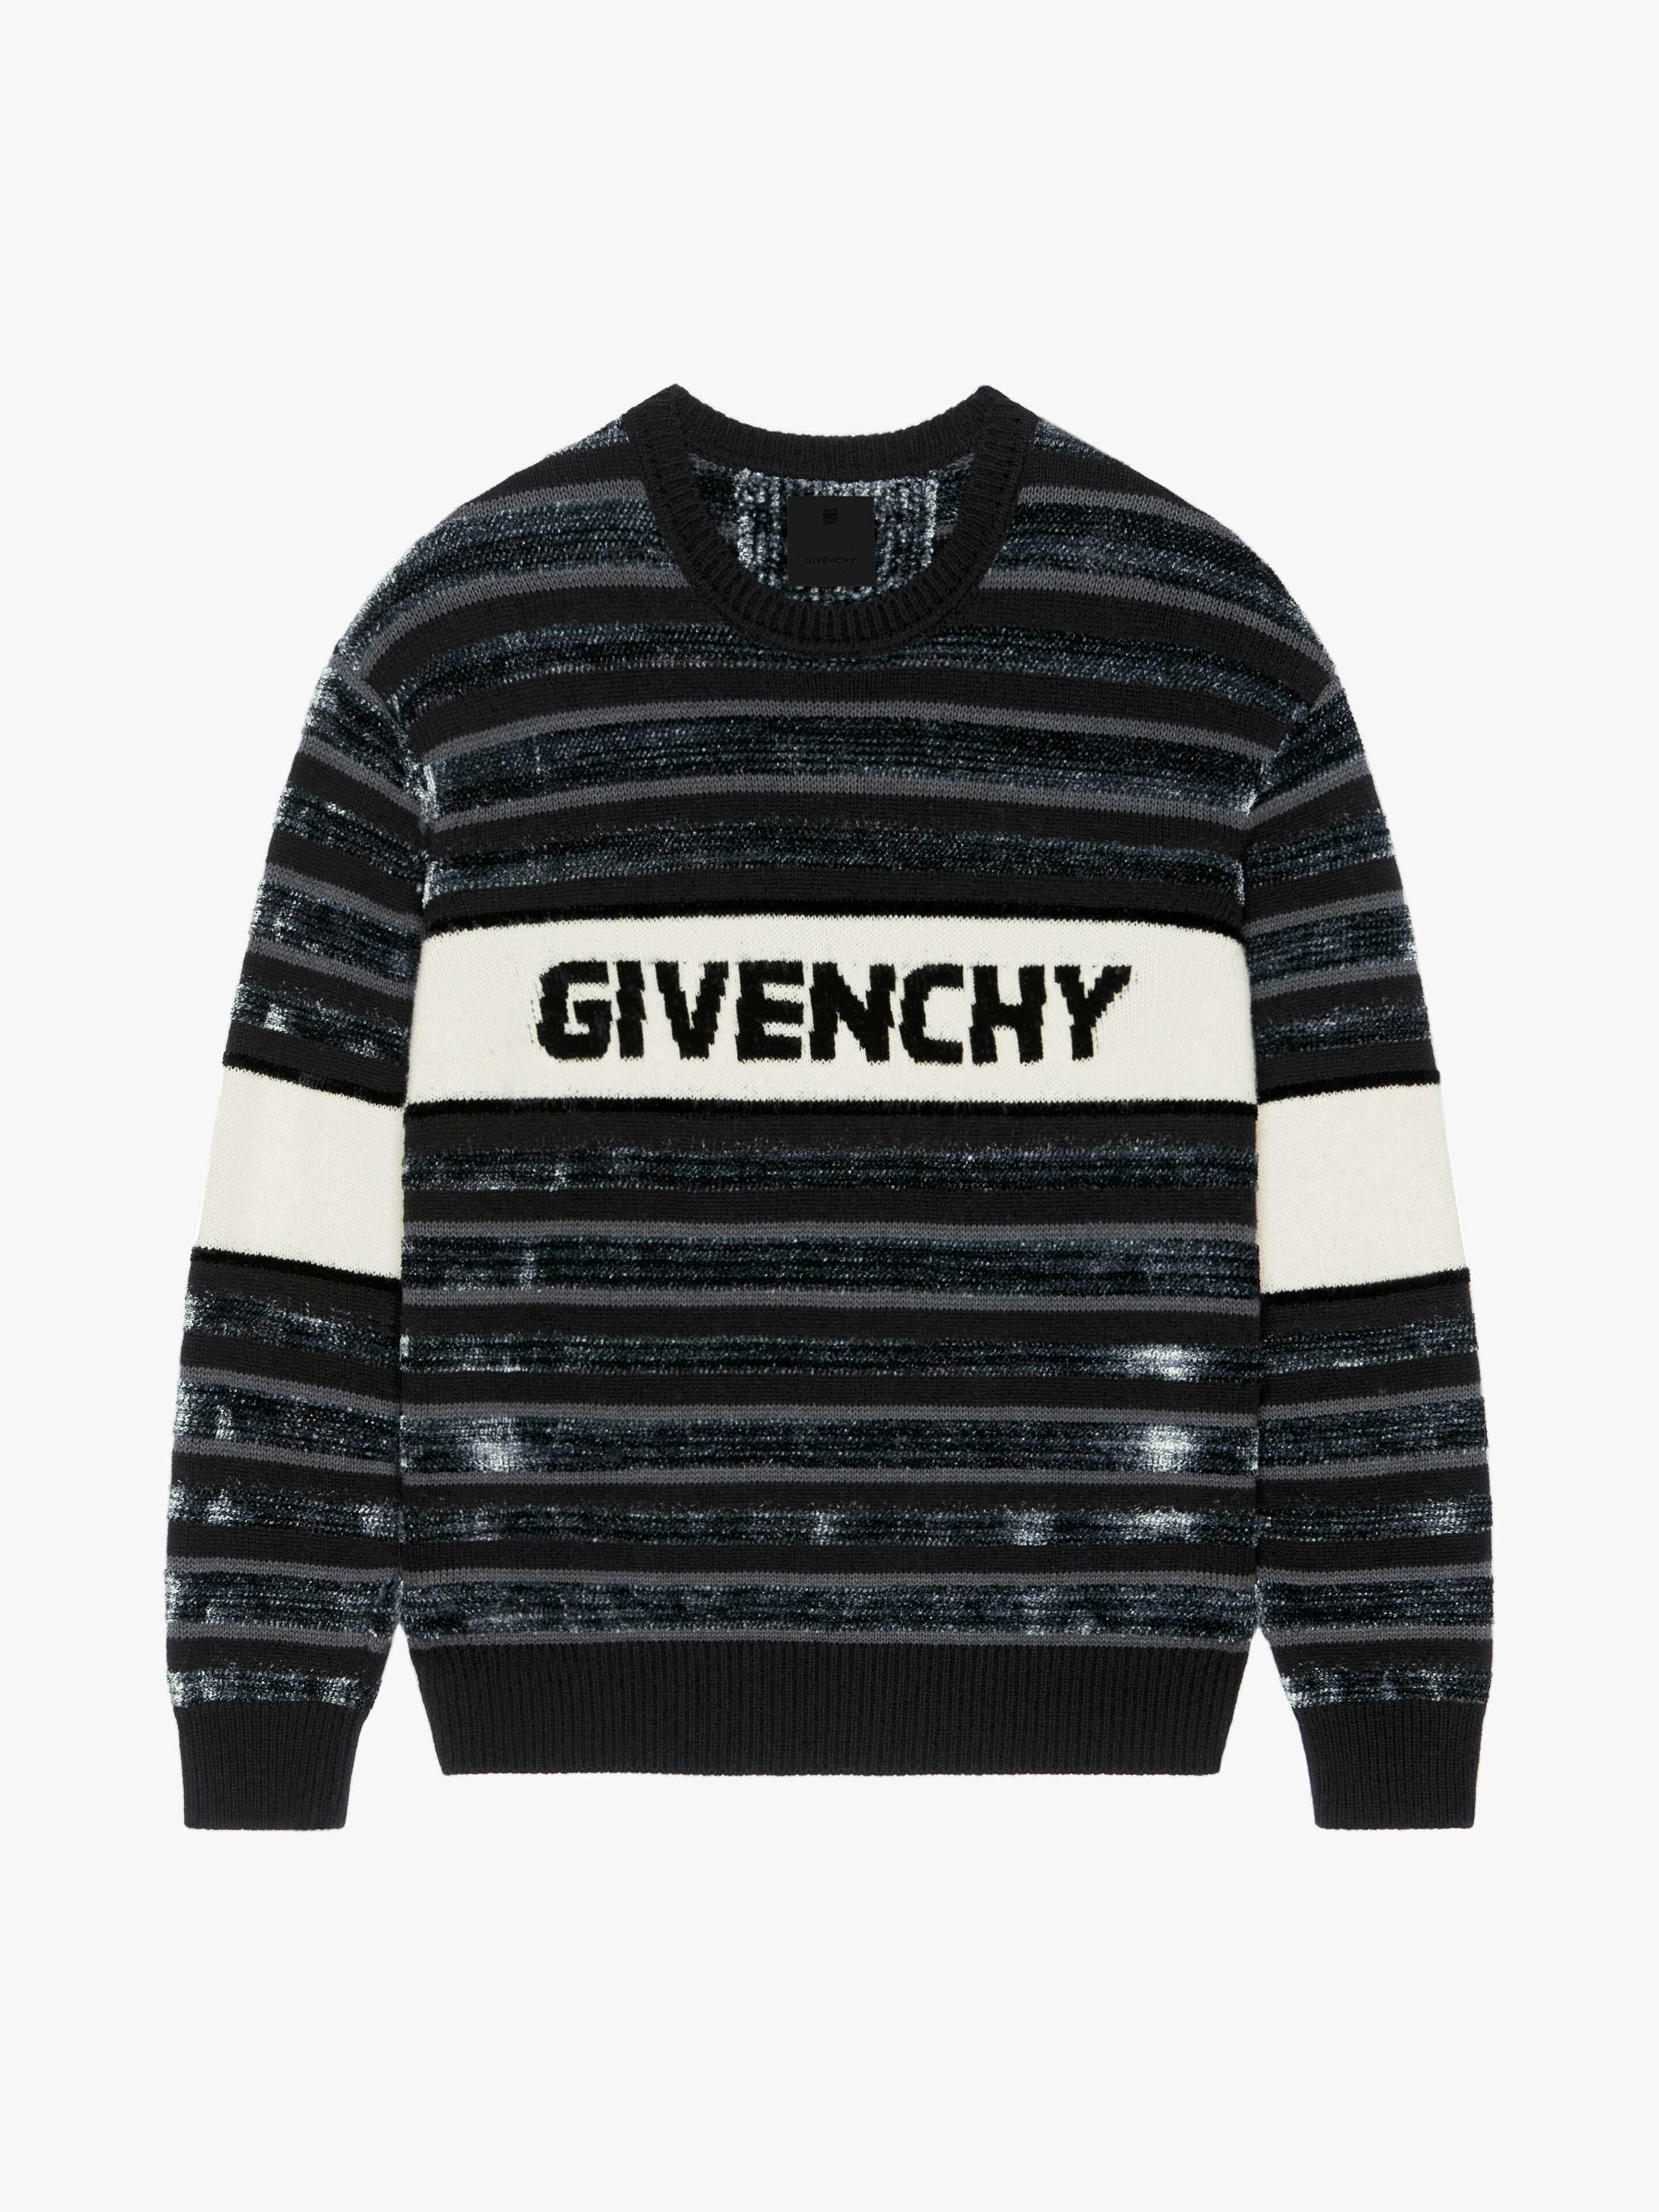 Men's Luxury Knitwear  Designer Sweaters & Cardigans - Givenchy